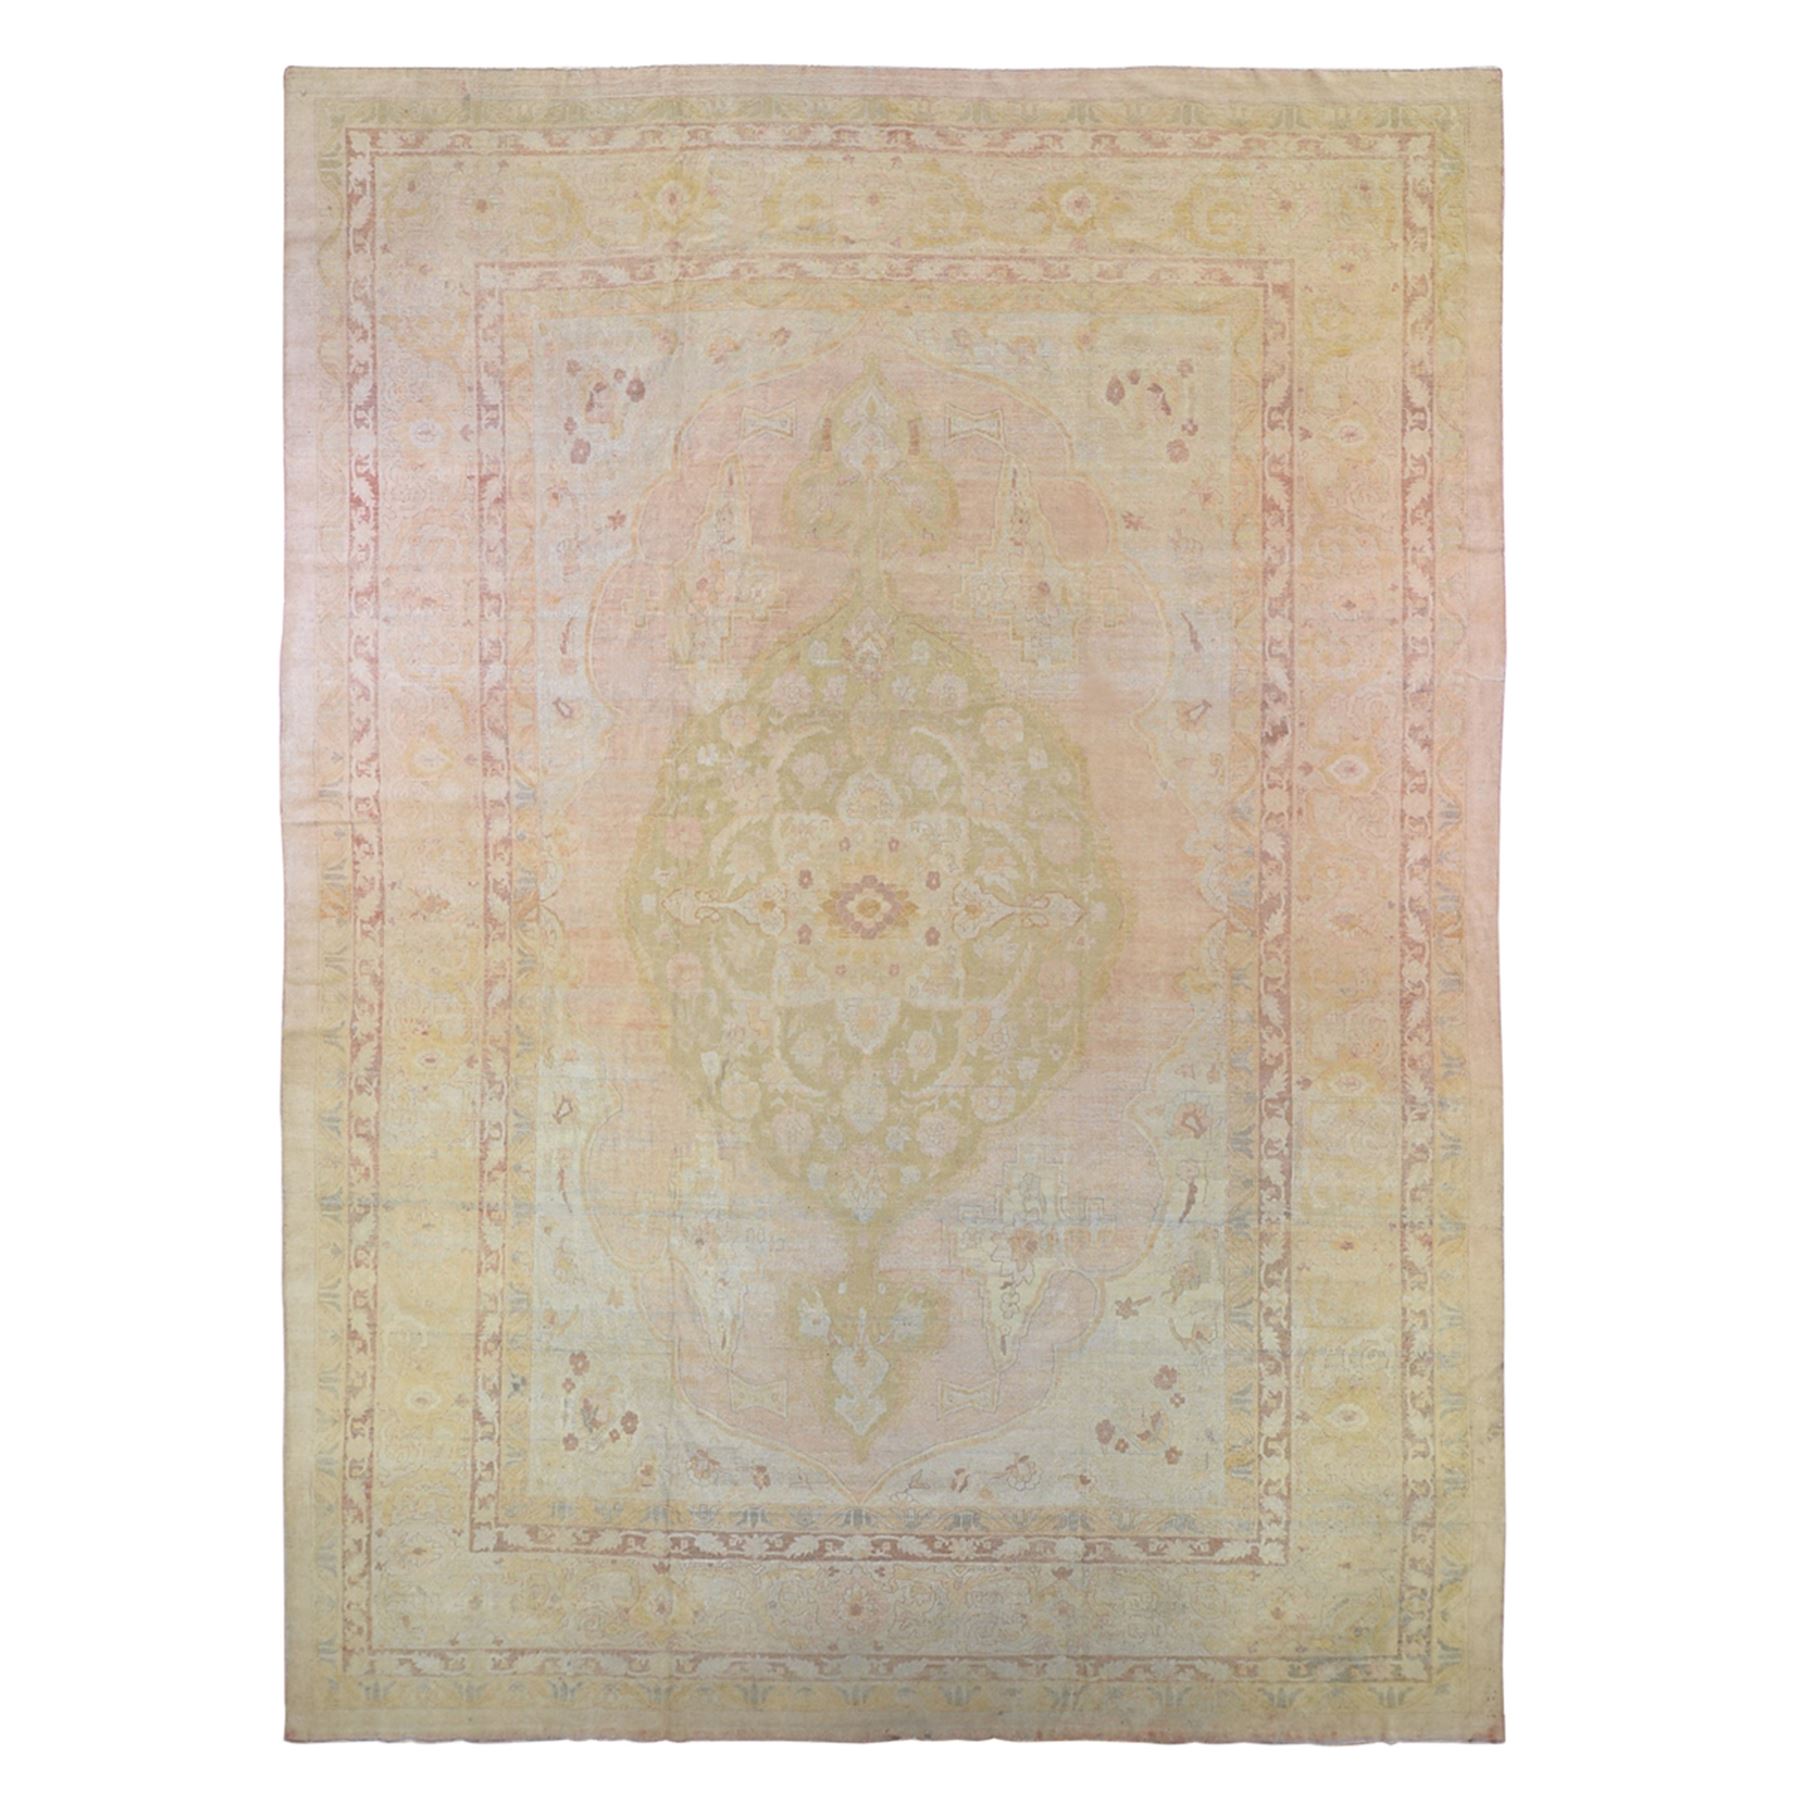 Antique-Hand-Knotted-Rug-332525